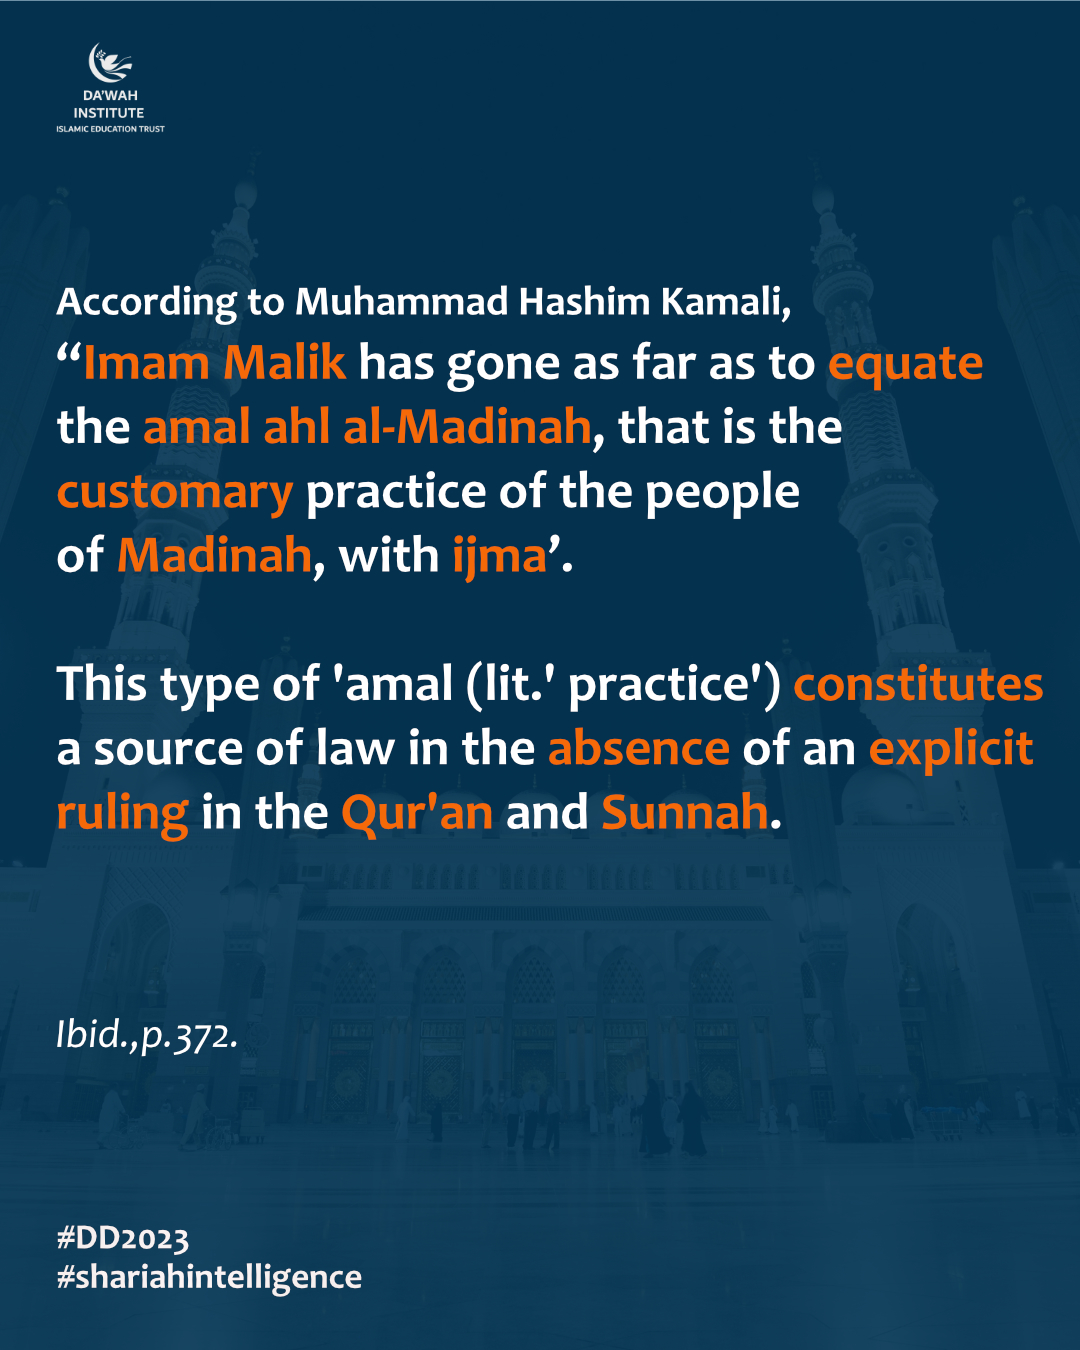 Amal ahl al-Madinah constitutes a source of law in the absence of an explicit ruling in the Qur’an and Sunnah.